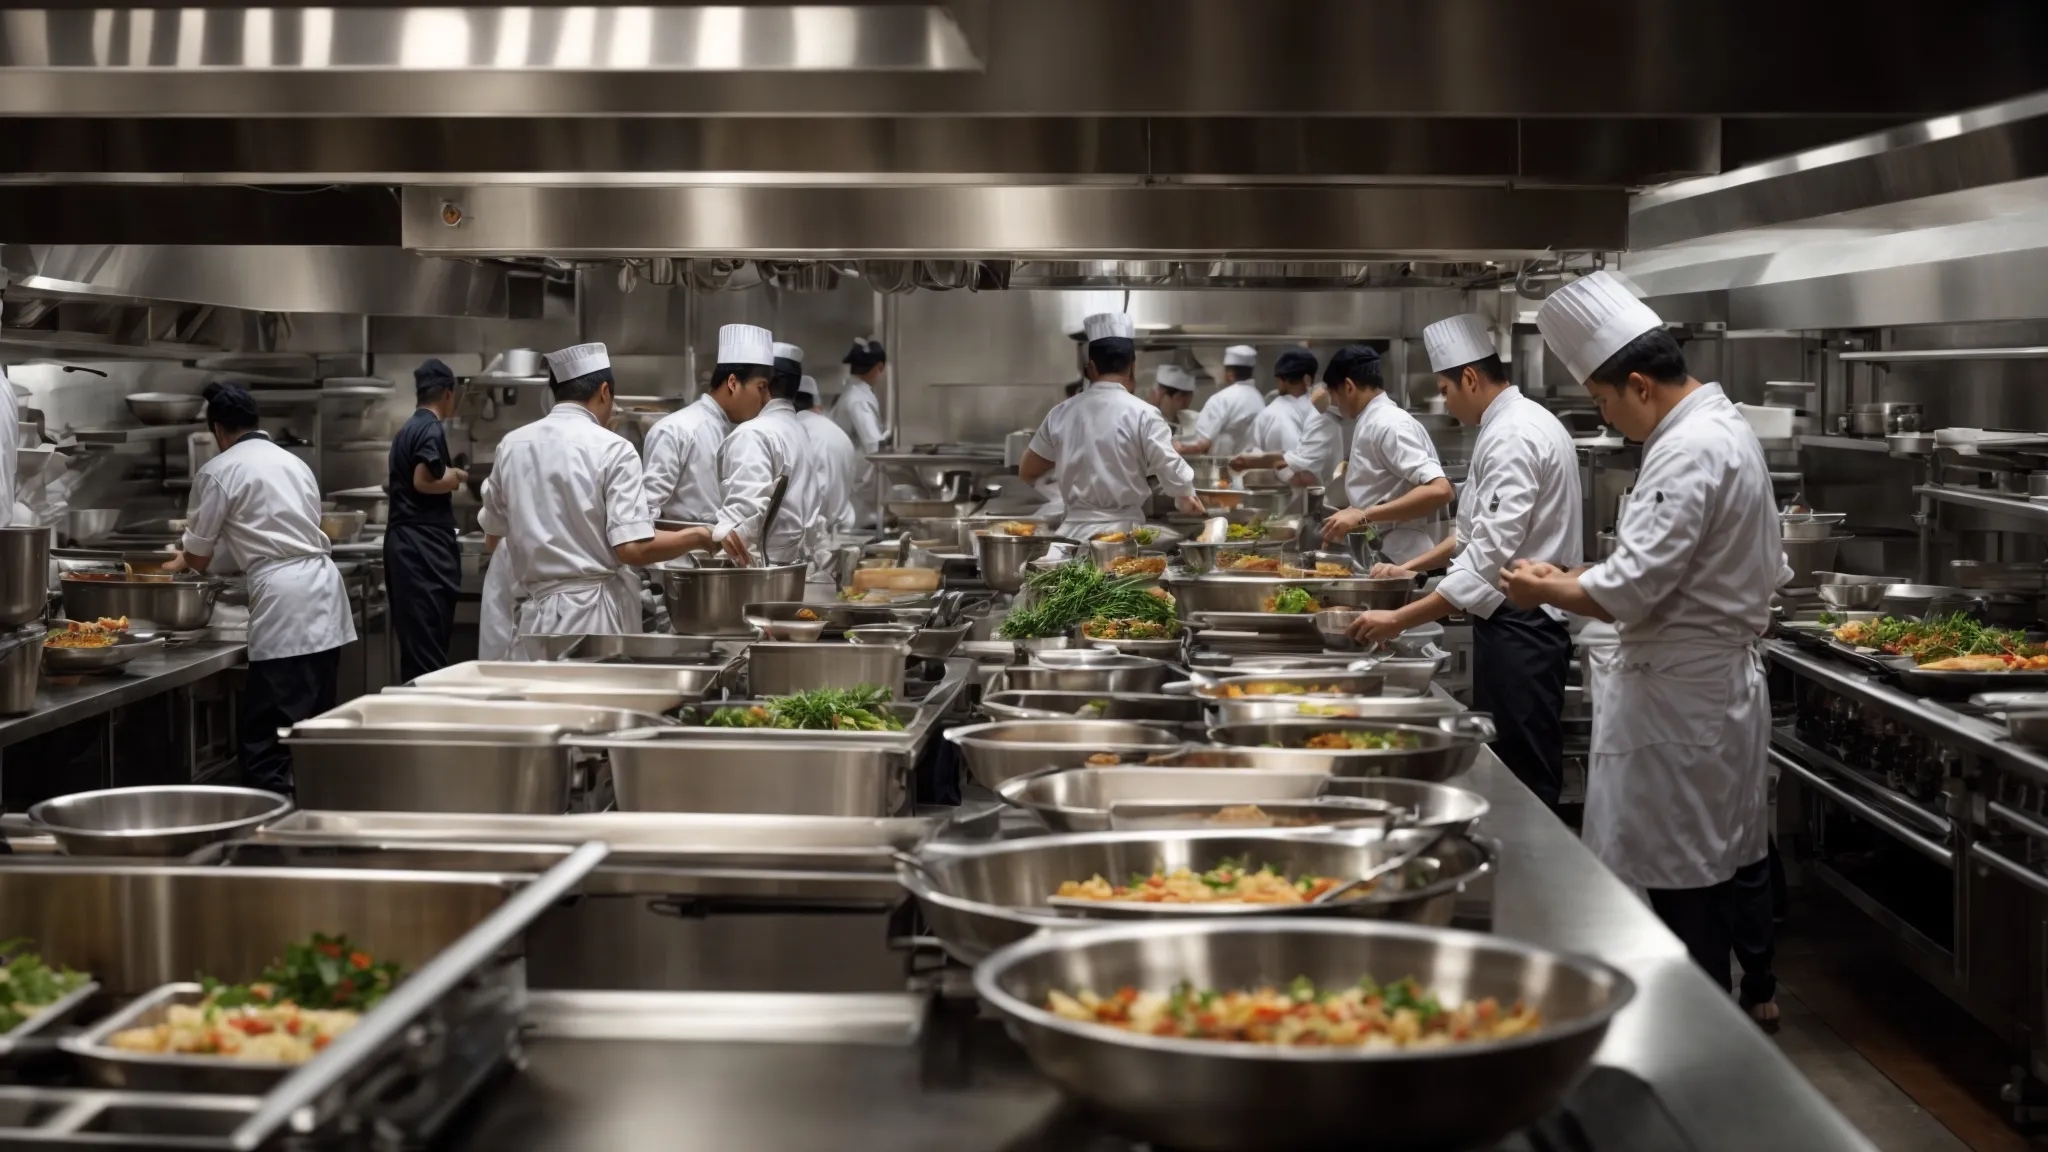 a bustling restaurant kitchen with chefs swiftly plating dishes, symbolizing rapid service and efficiency.